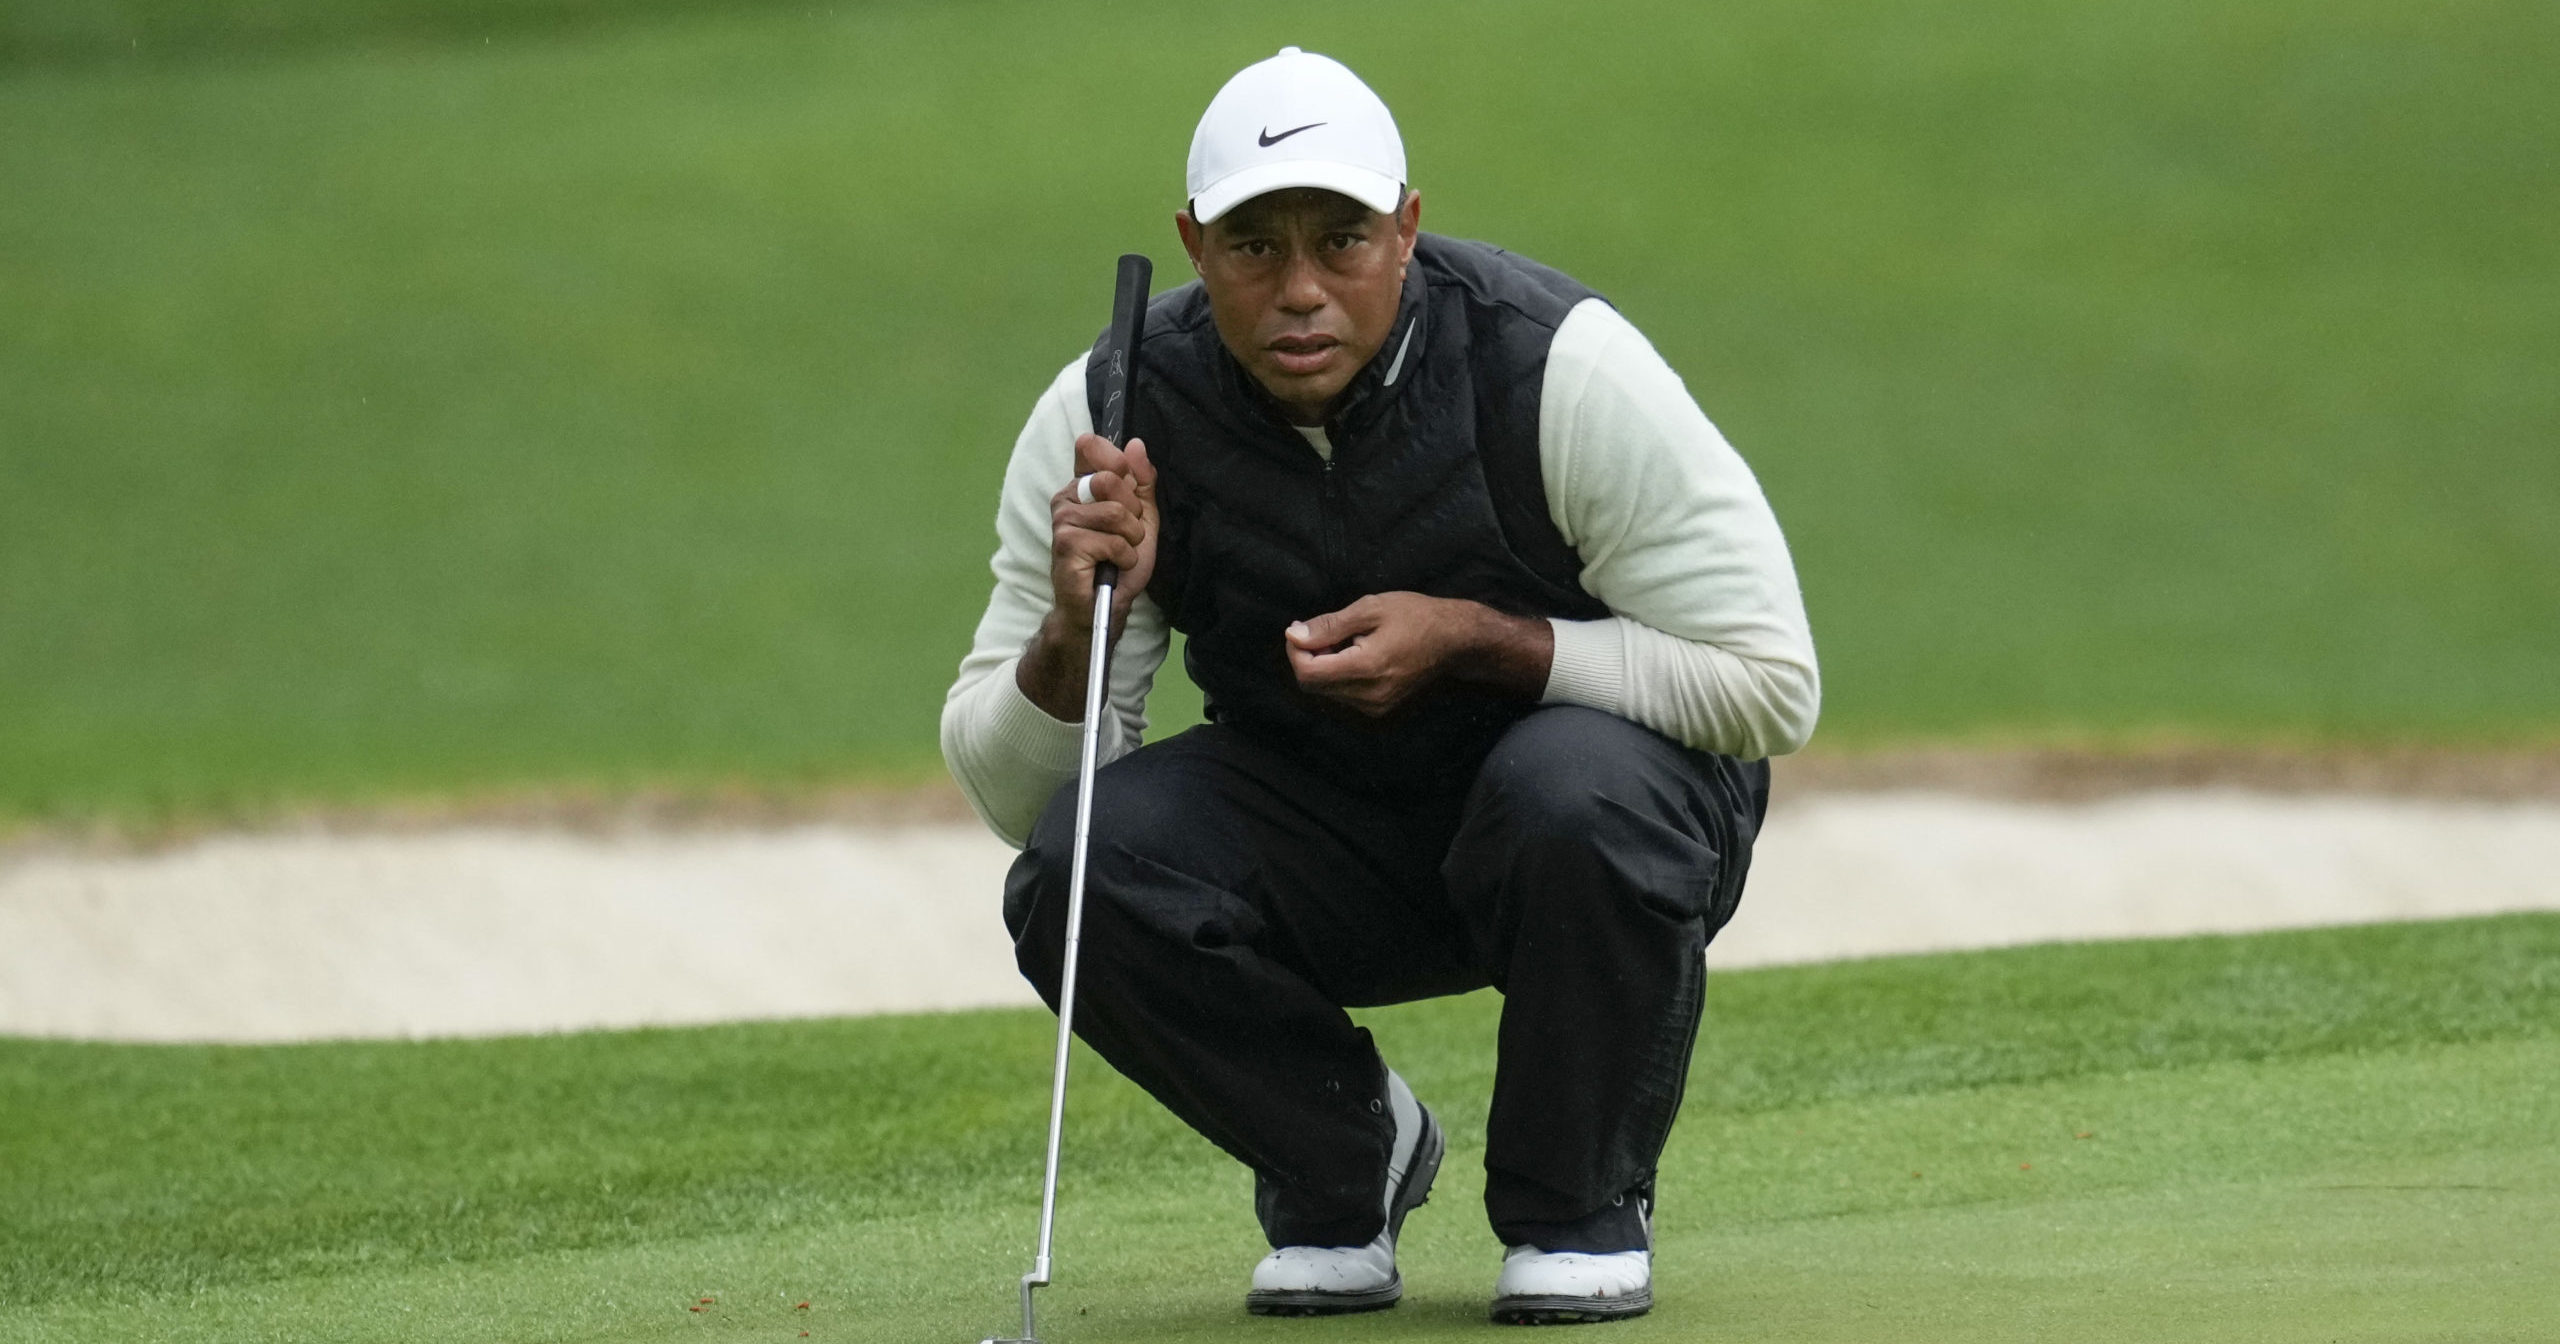 Tiger Woods lines up a putt on the 16th hole during the second round of the Masters on April 8 in Augusta, Georgia.